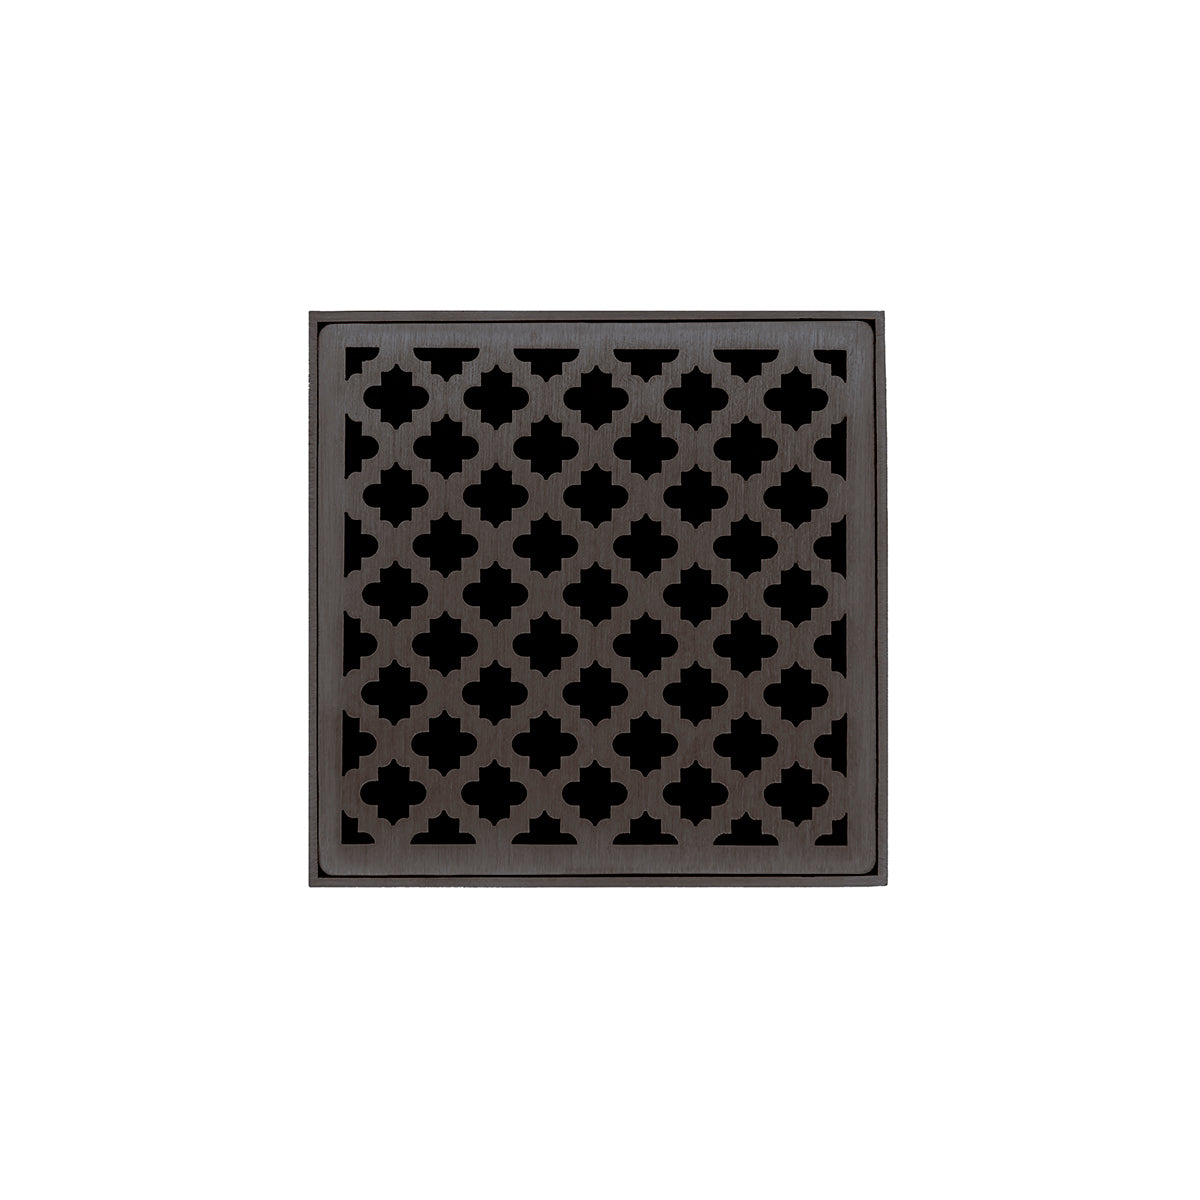 Infinity Drain 5" x 5" MD 5 Premium Center Drain Kit with Moor Pattern Decorative Plate with PVC Drain Body, 2" Outlet